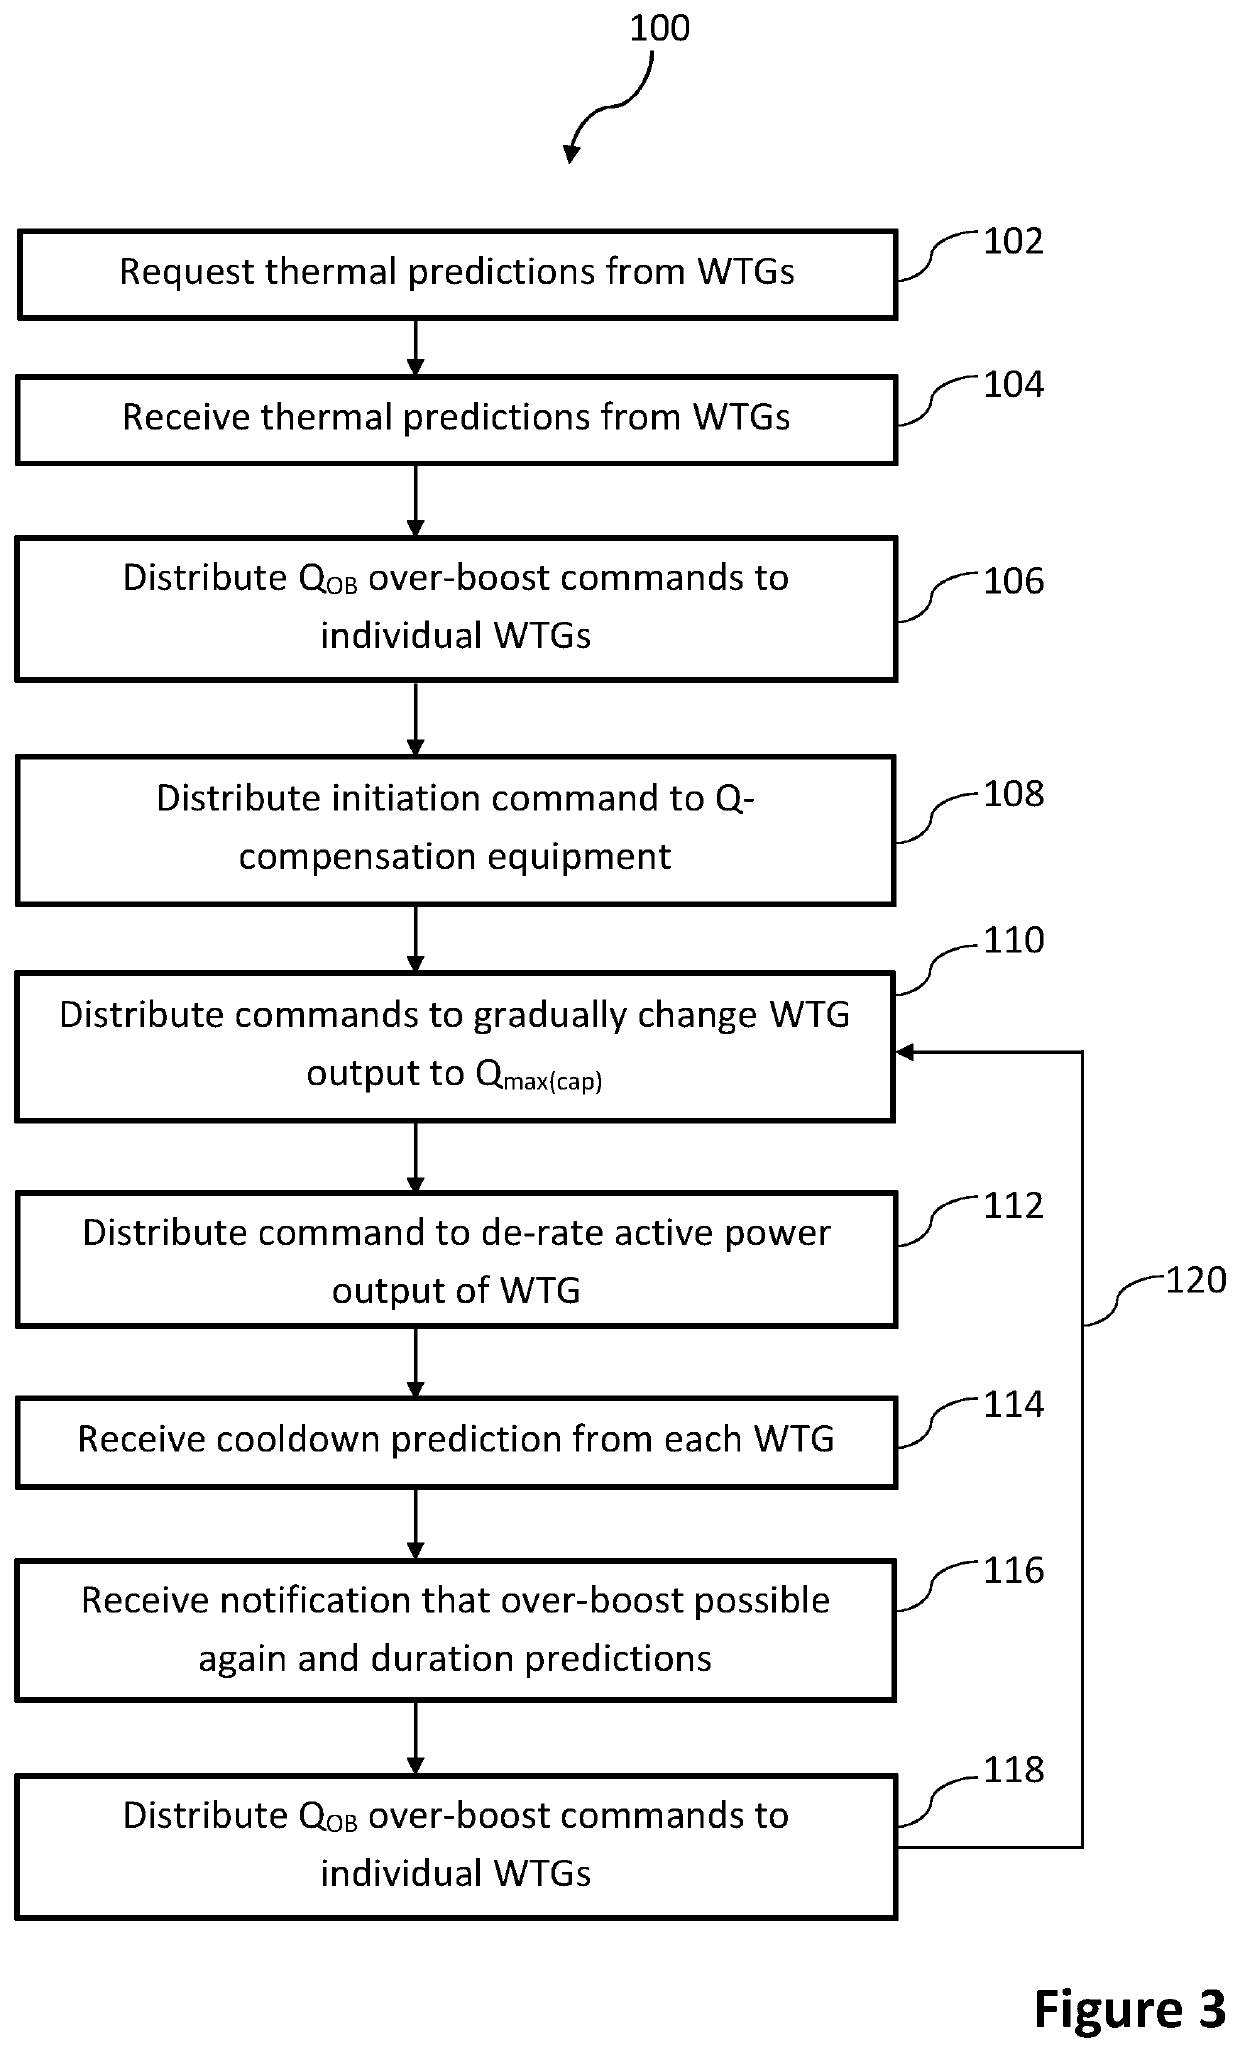 Improvements relating to reactive power support in wind power plants